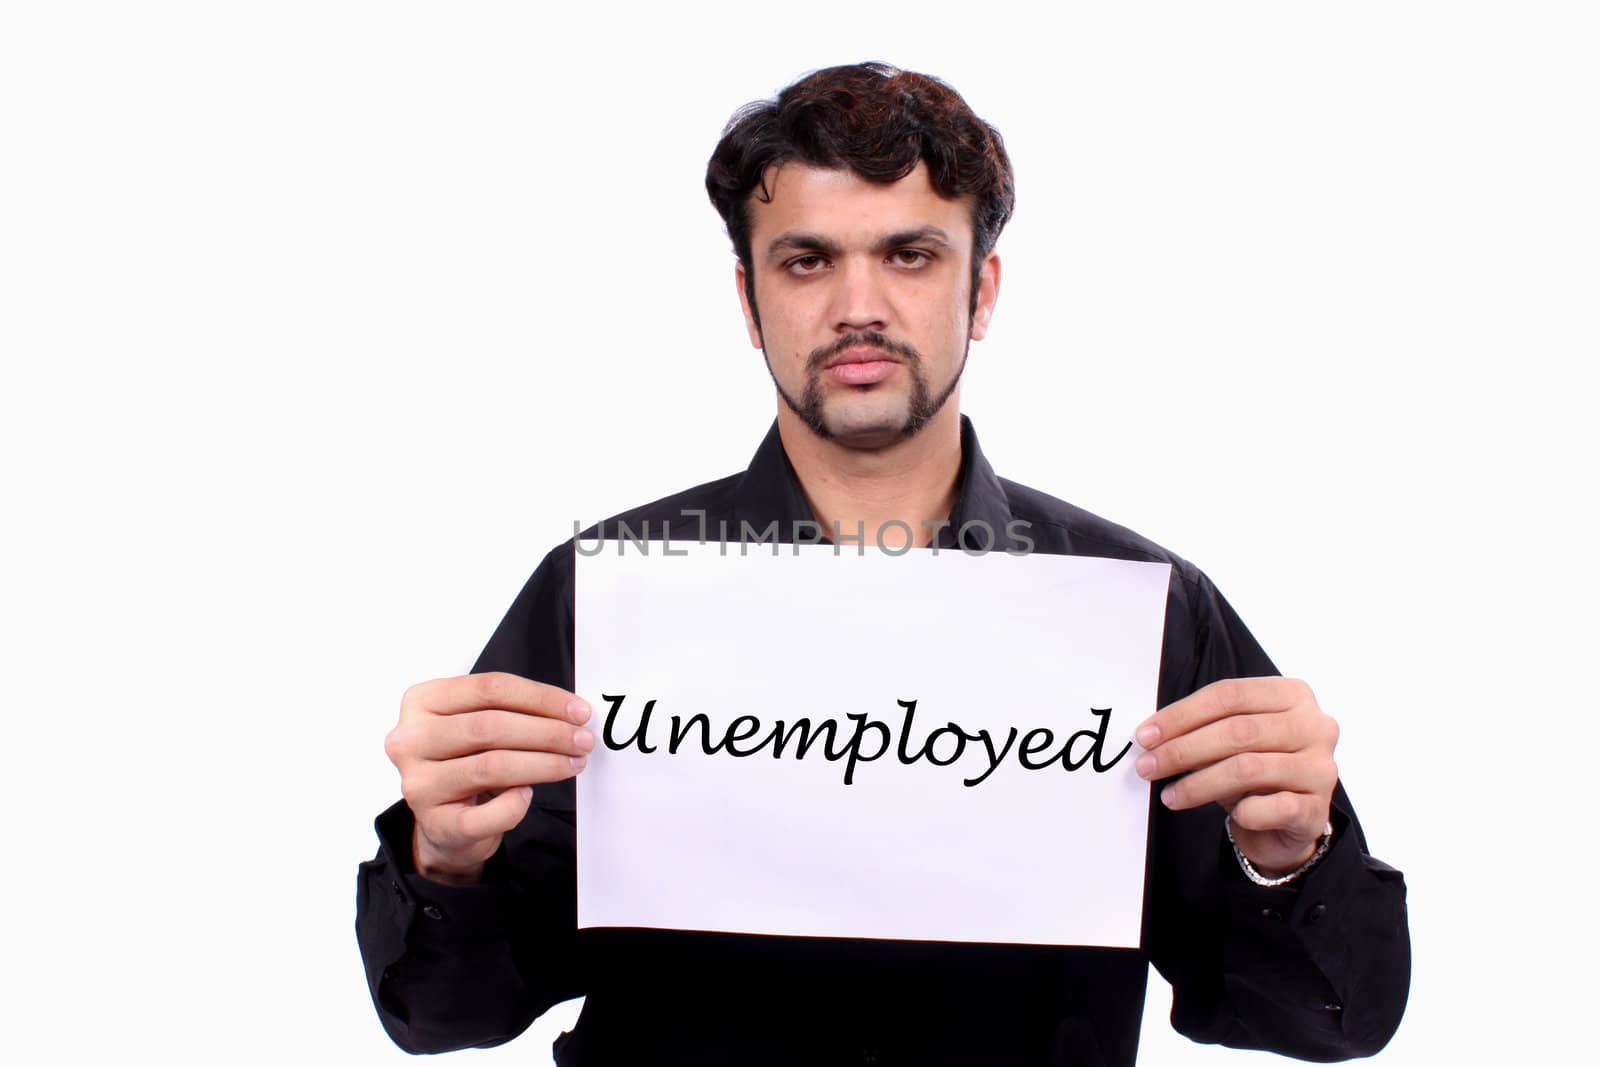 A sad unemployed Indian man holding an 'unemployment' sign, on white studio background.